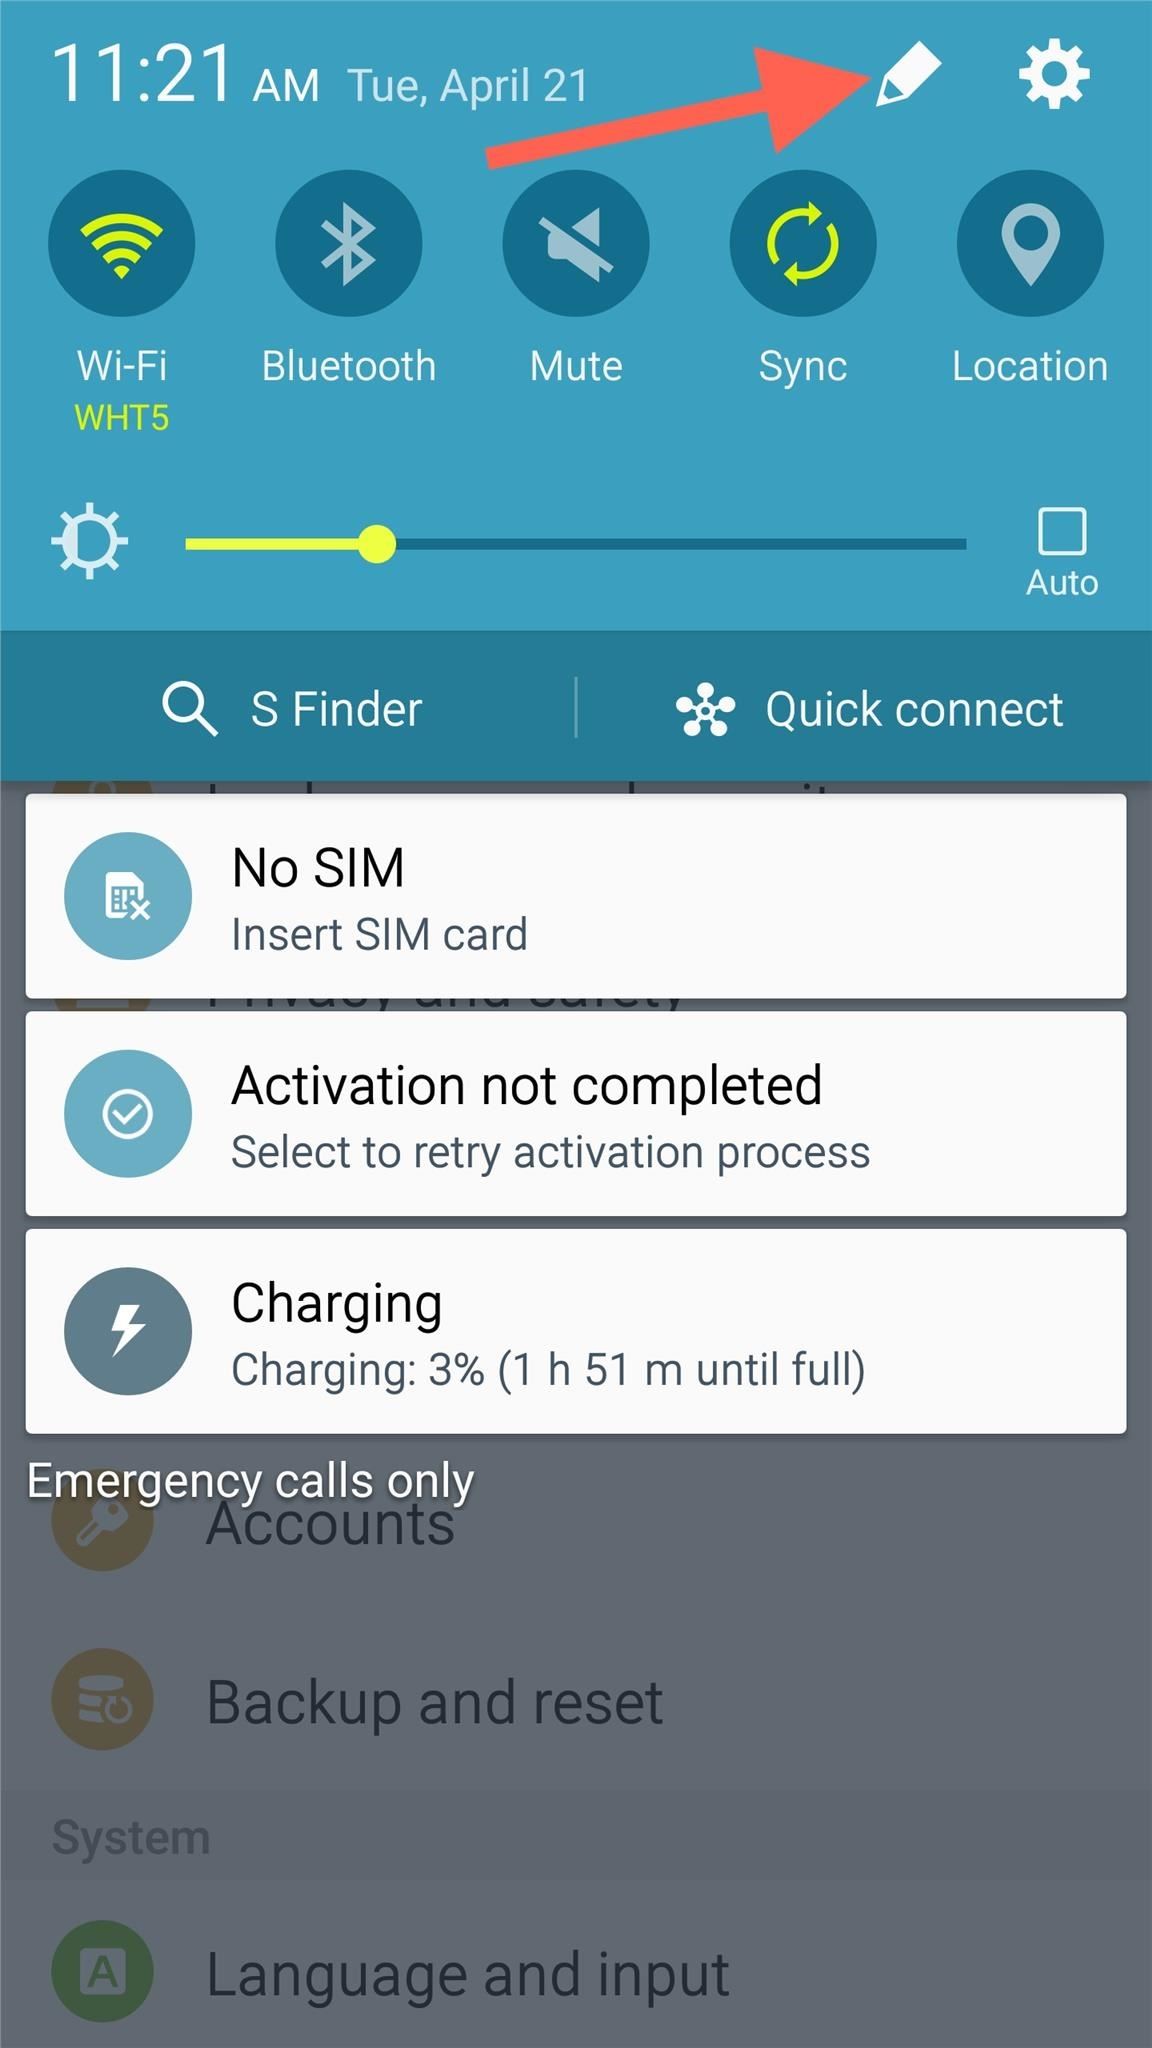 How to Secure Photos, Videos, & More on Your Galaxy S6 Using Private Mode